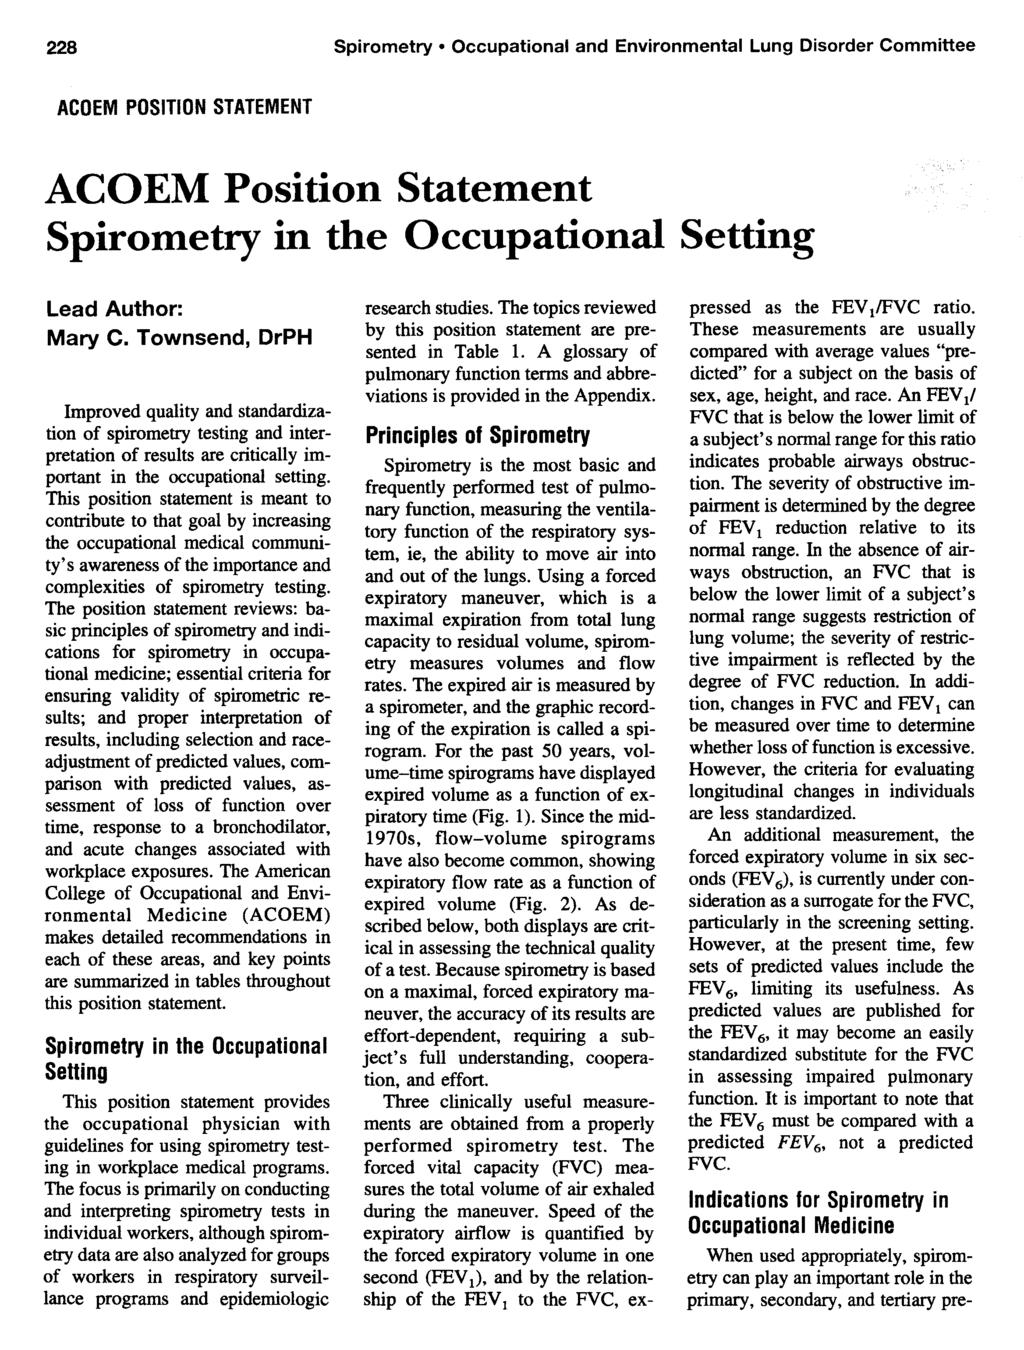 228 Spirometry Occupational and Environmental Lung Disorder Committee ACOEM POSITION STATEMENT ACOEM Position Statement Spirometry in the Occupational Setting Lead Author: Mary C.